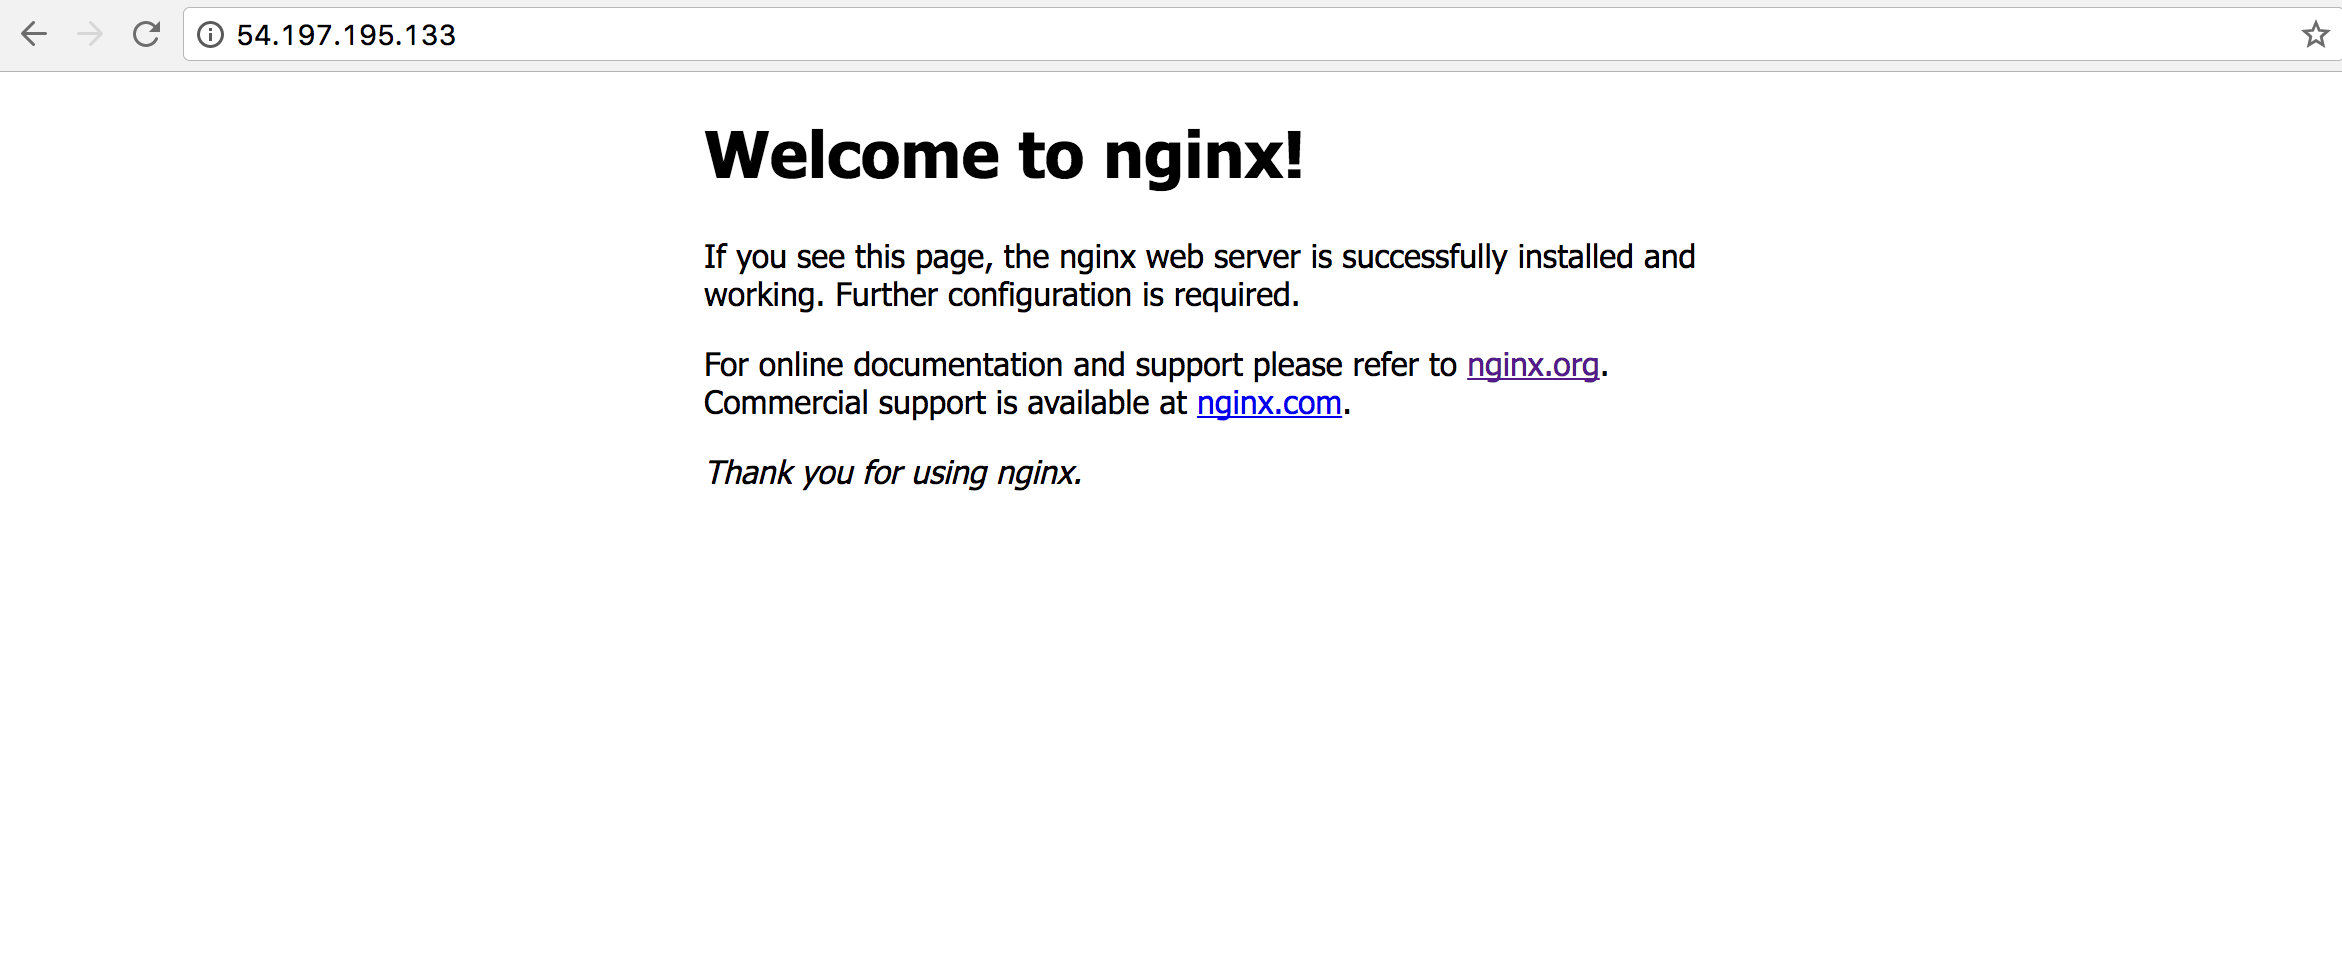 nginx-welcome-page